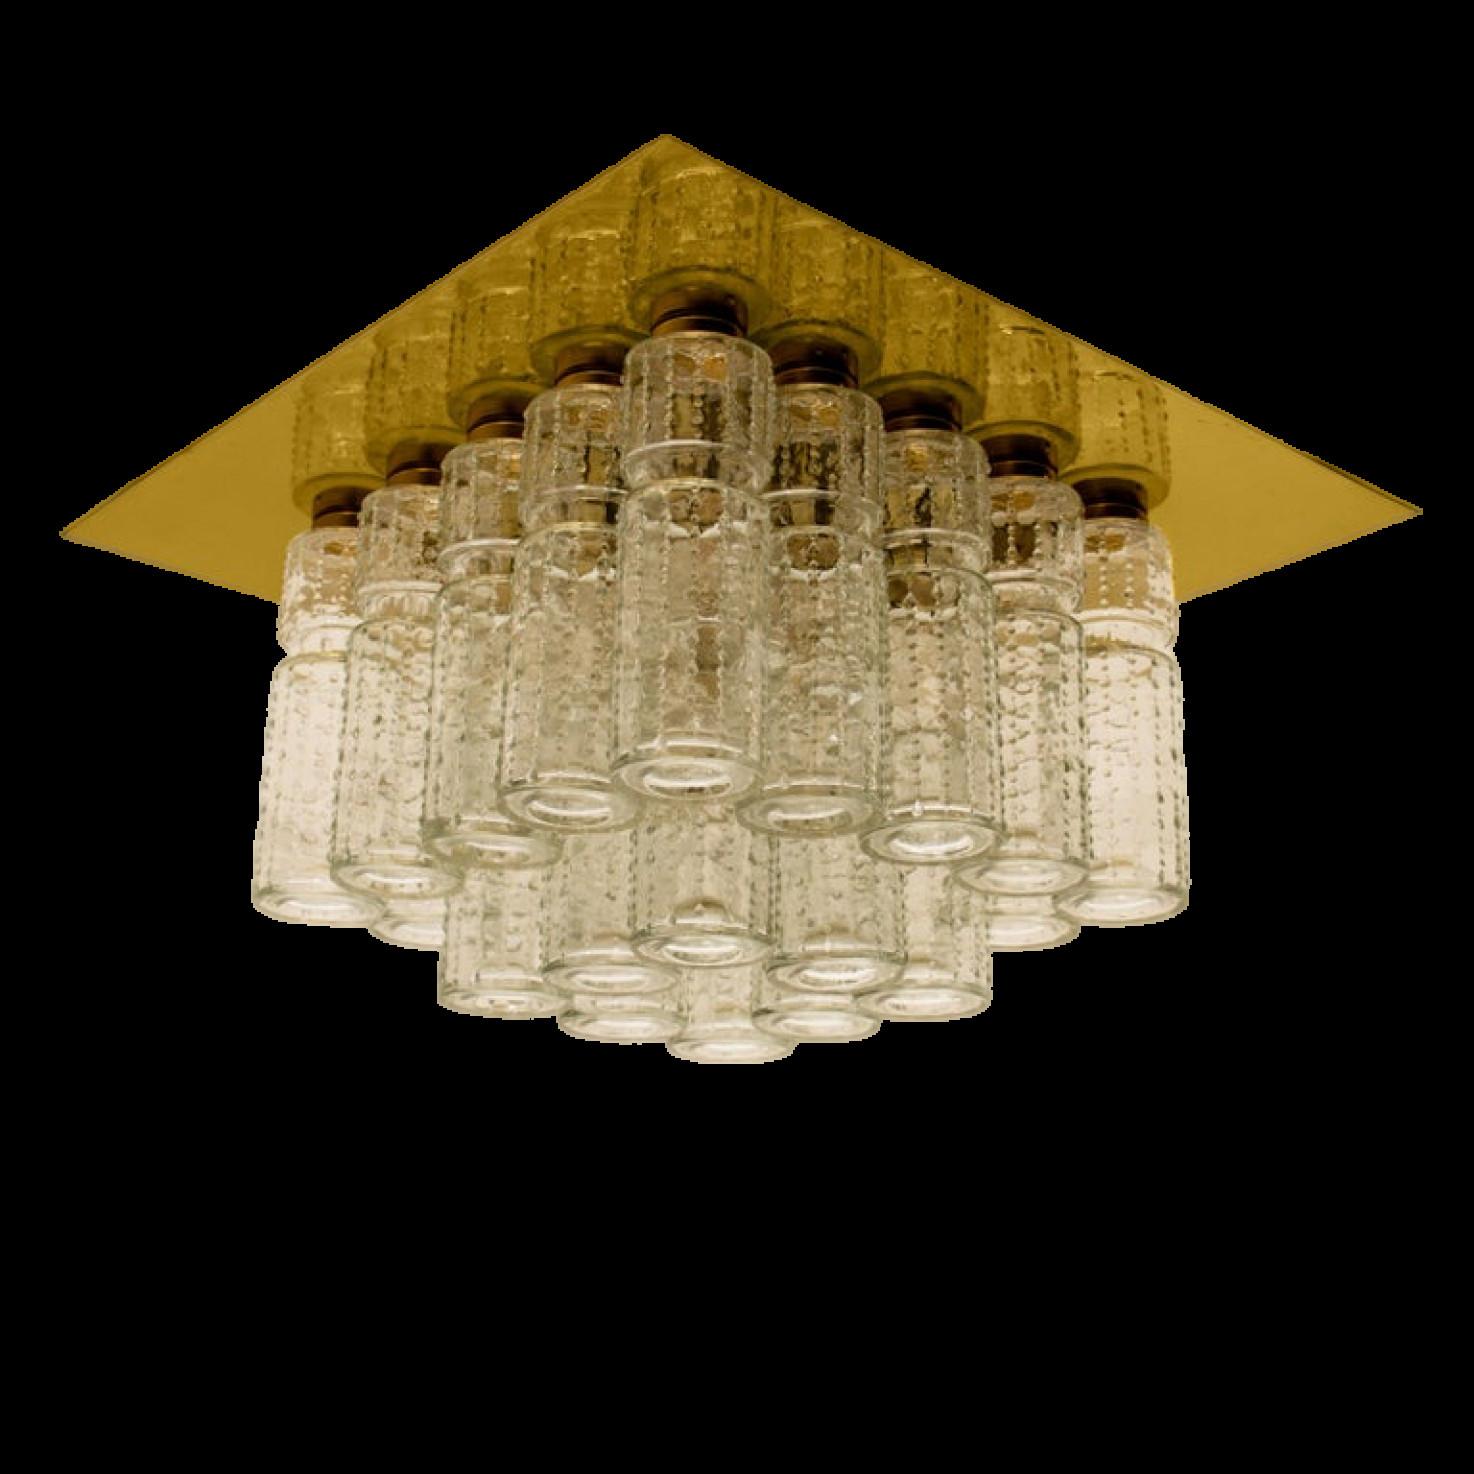 One of the six amazing flush mount chandeliers with 24 hanging hand blow textured hollow glass prisms mounted on a brass frame. Made by Glashütte Limburg in Germany designed by Boris Tabacoff in the 1970s. High end light fixtures from the 20th